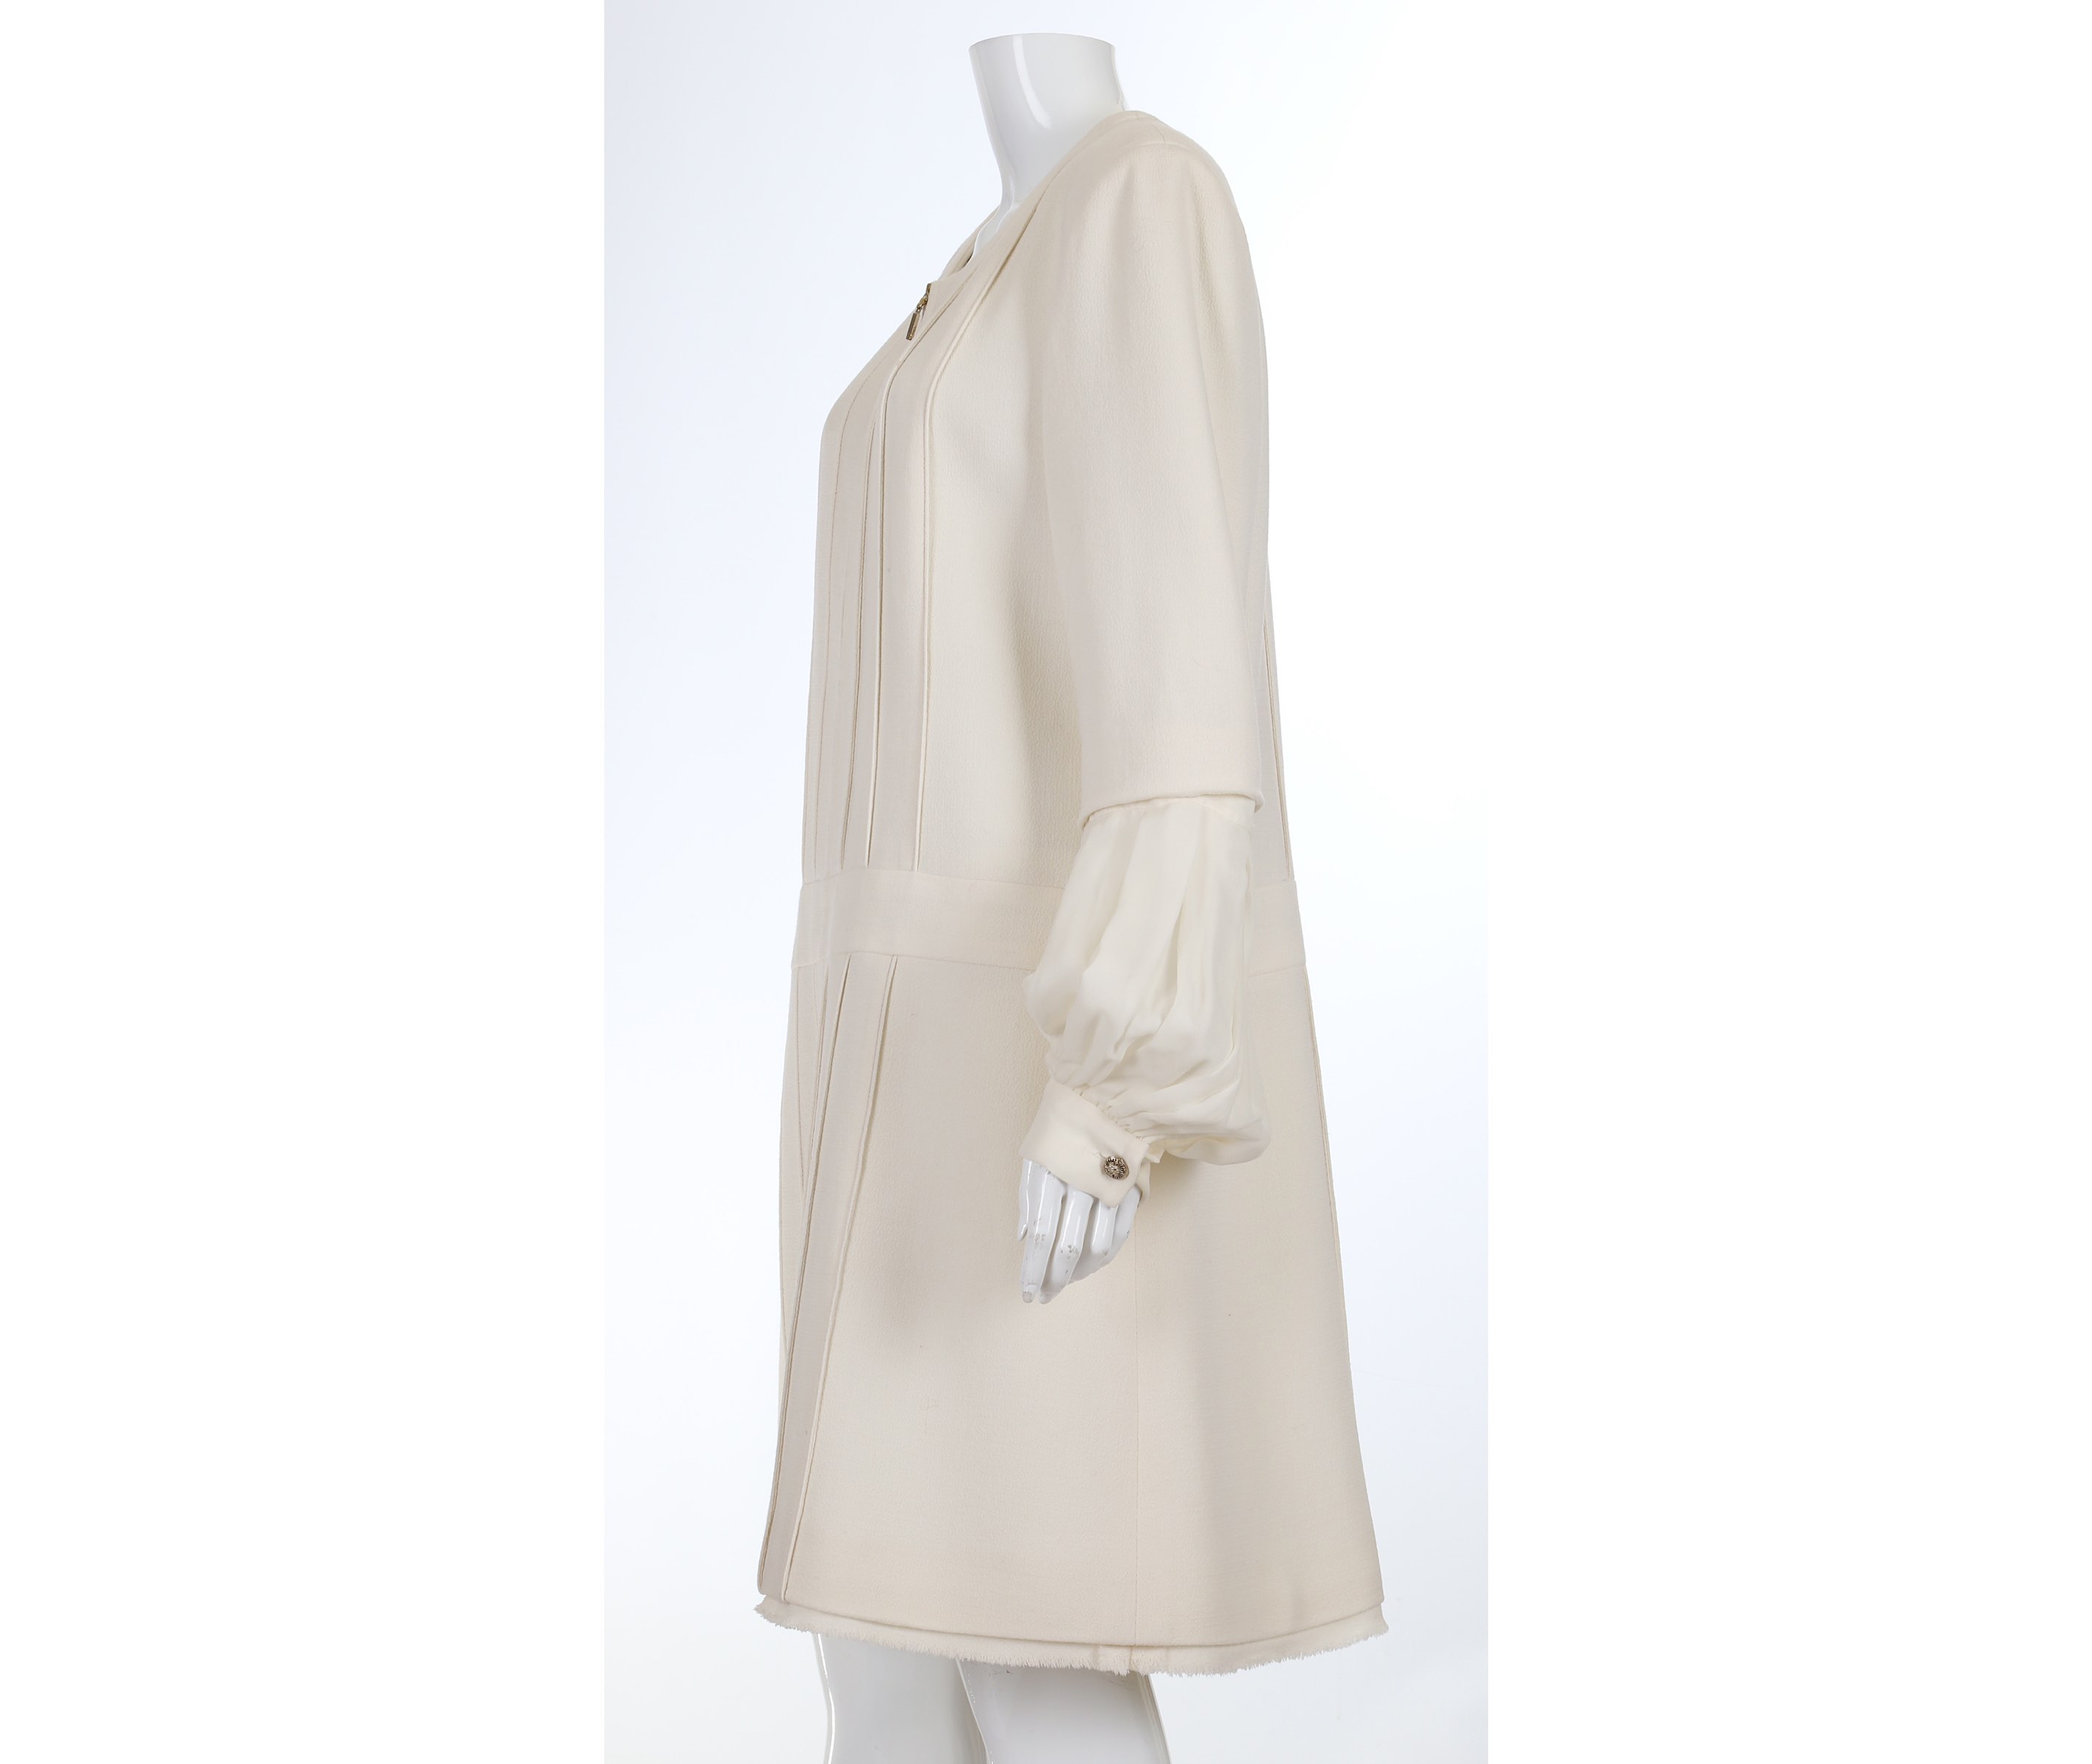 Chanel Cream Pleated Dress Coat, 2010s, with zip down front and removable silk sleeve details, - Image 3 of 5